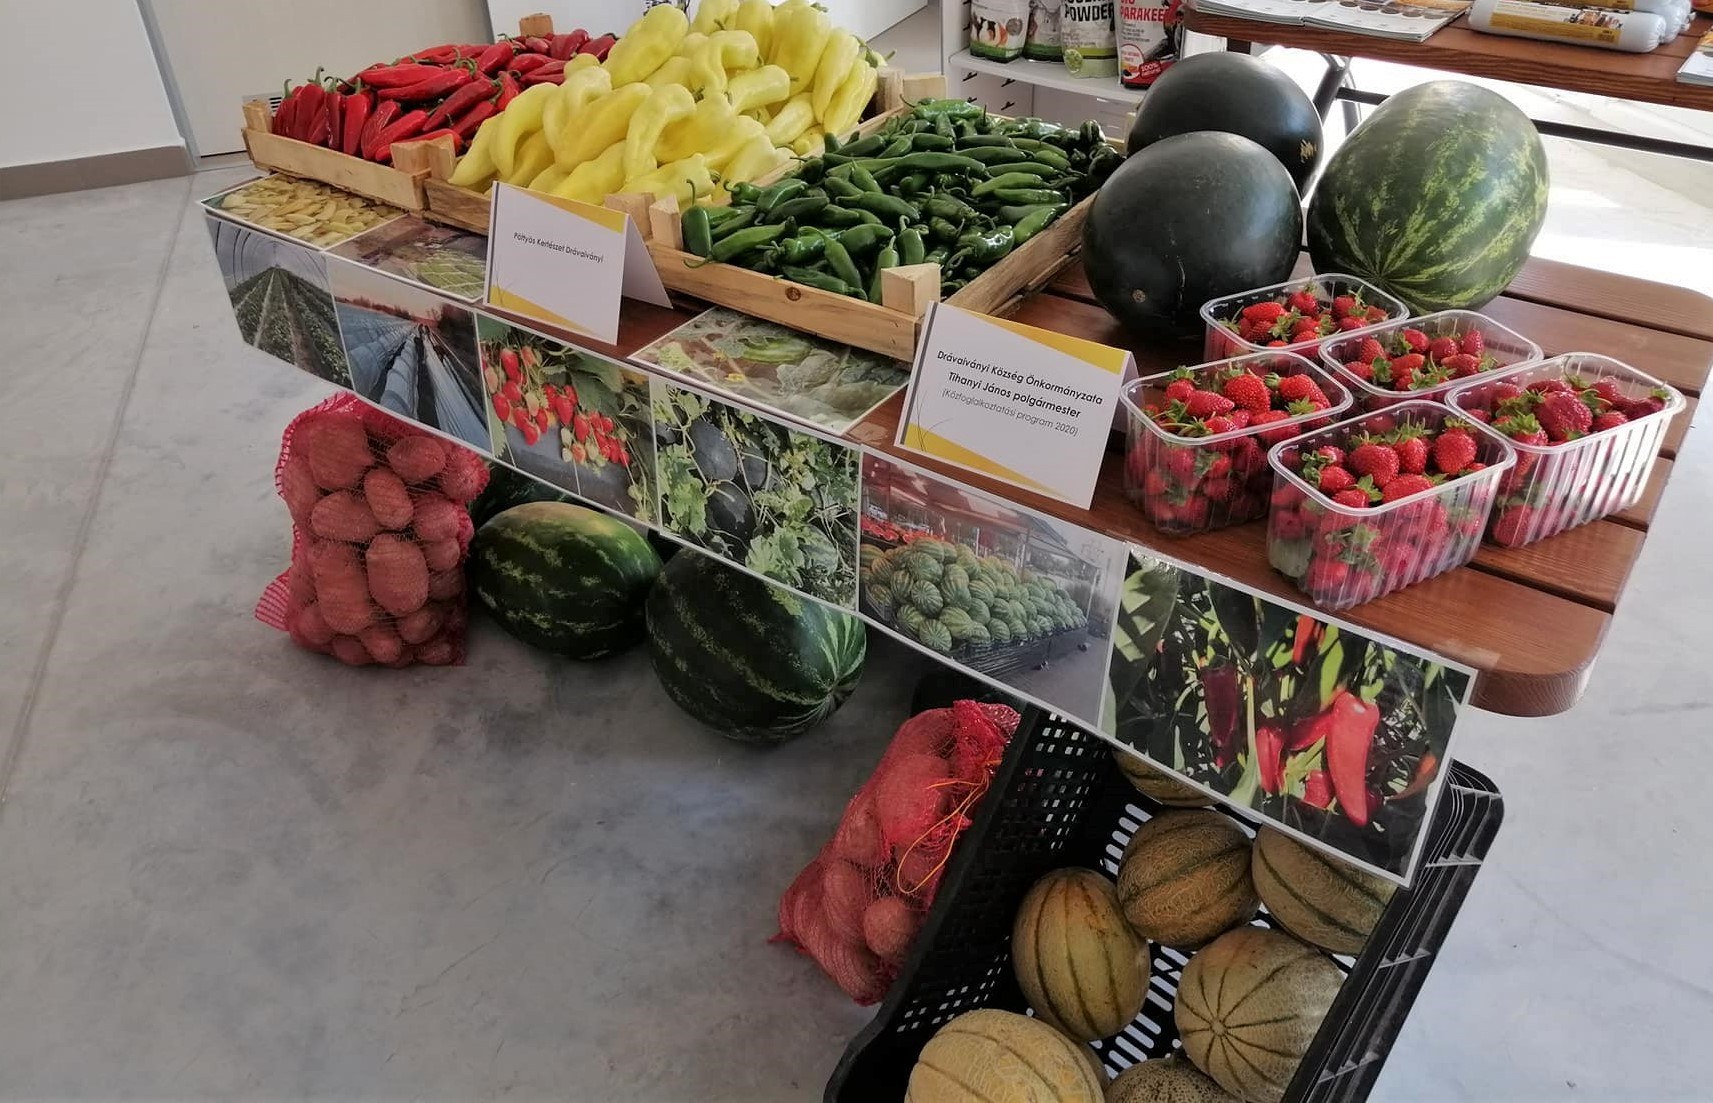 New farmers’ market strengthens Sellye’s role in the local area